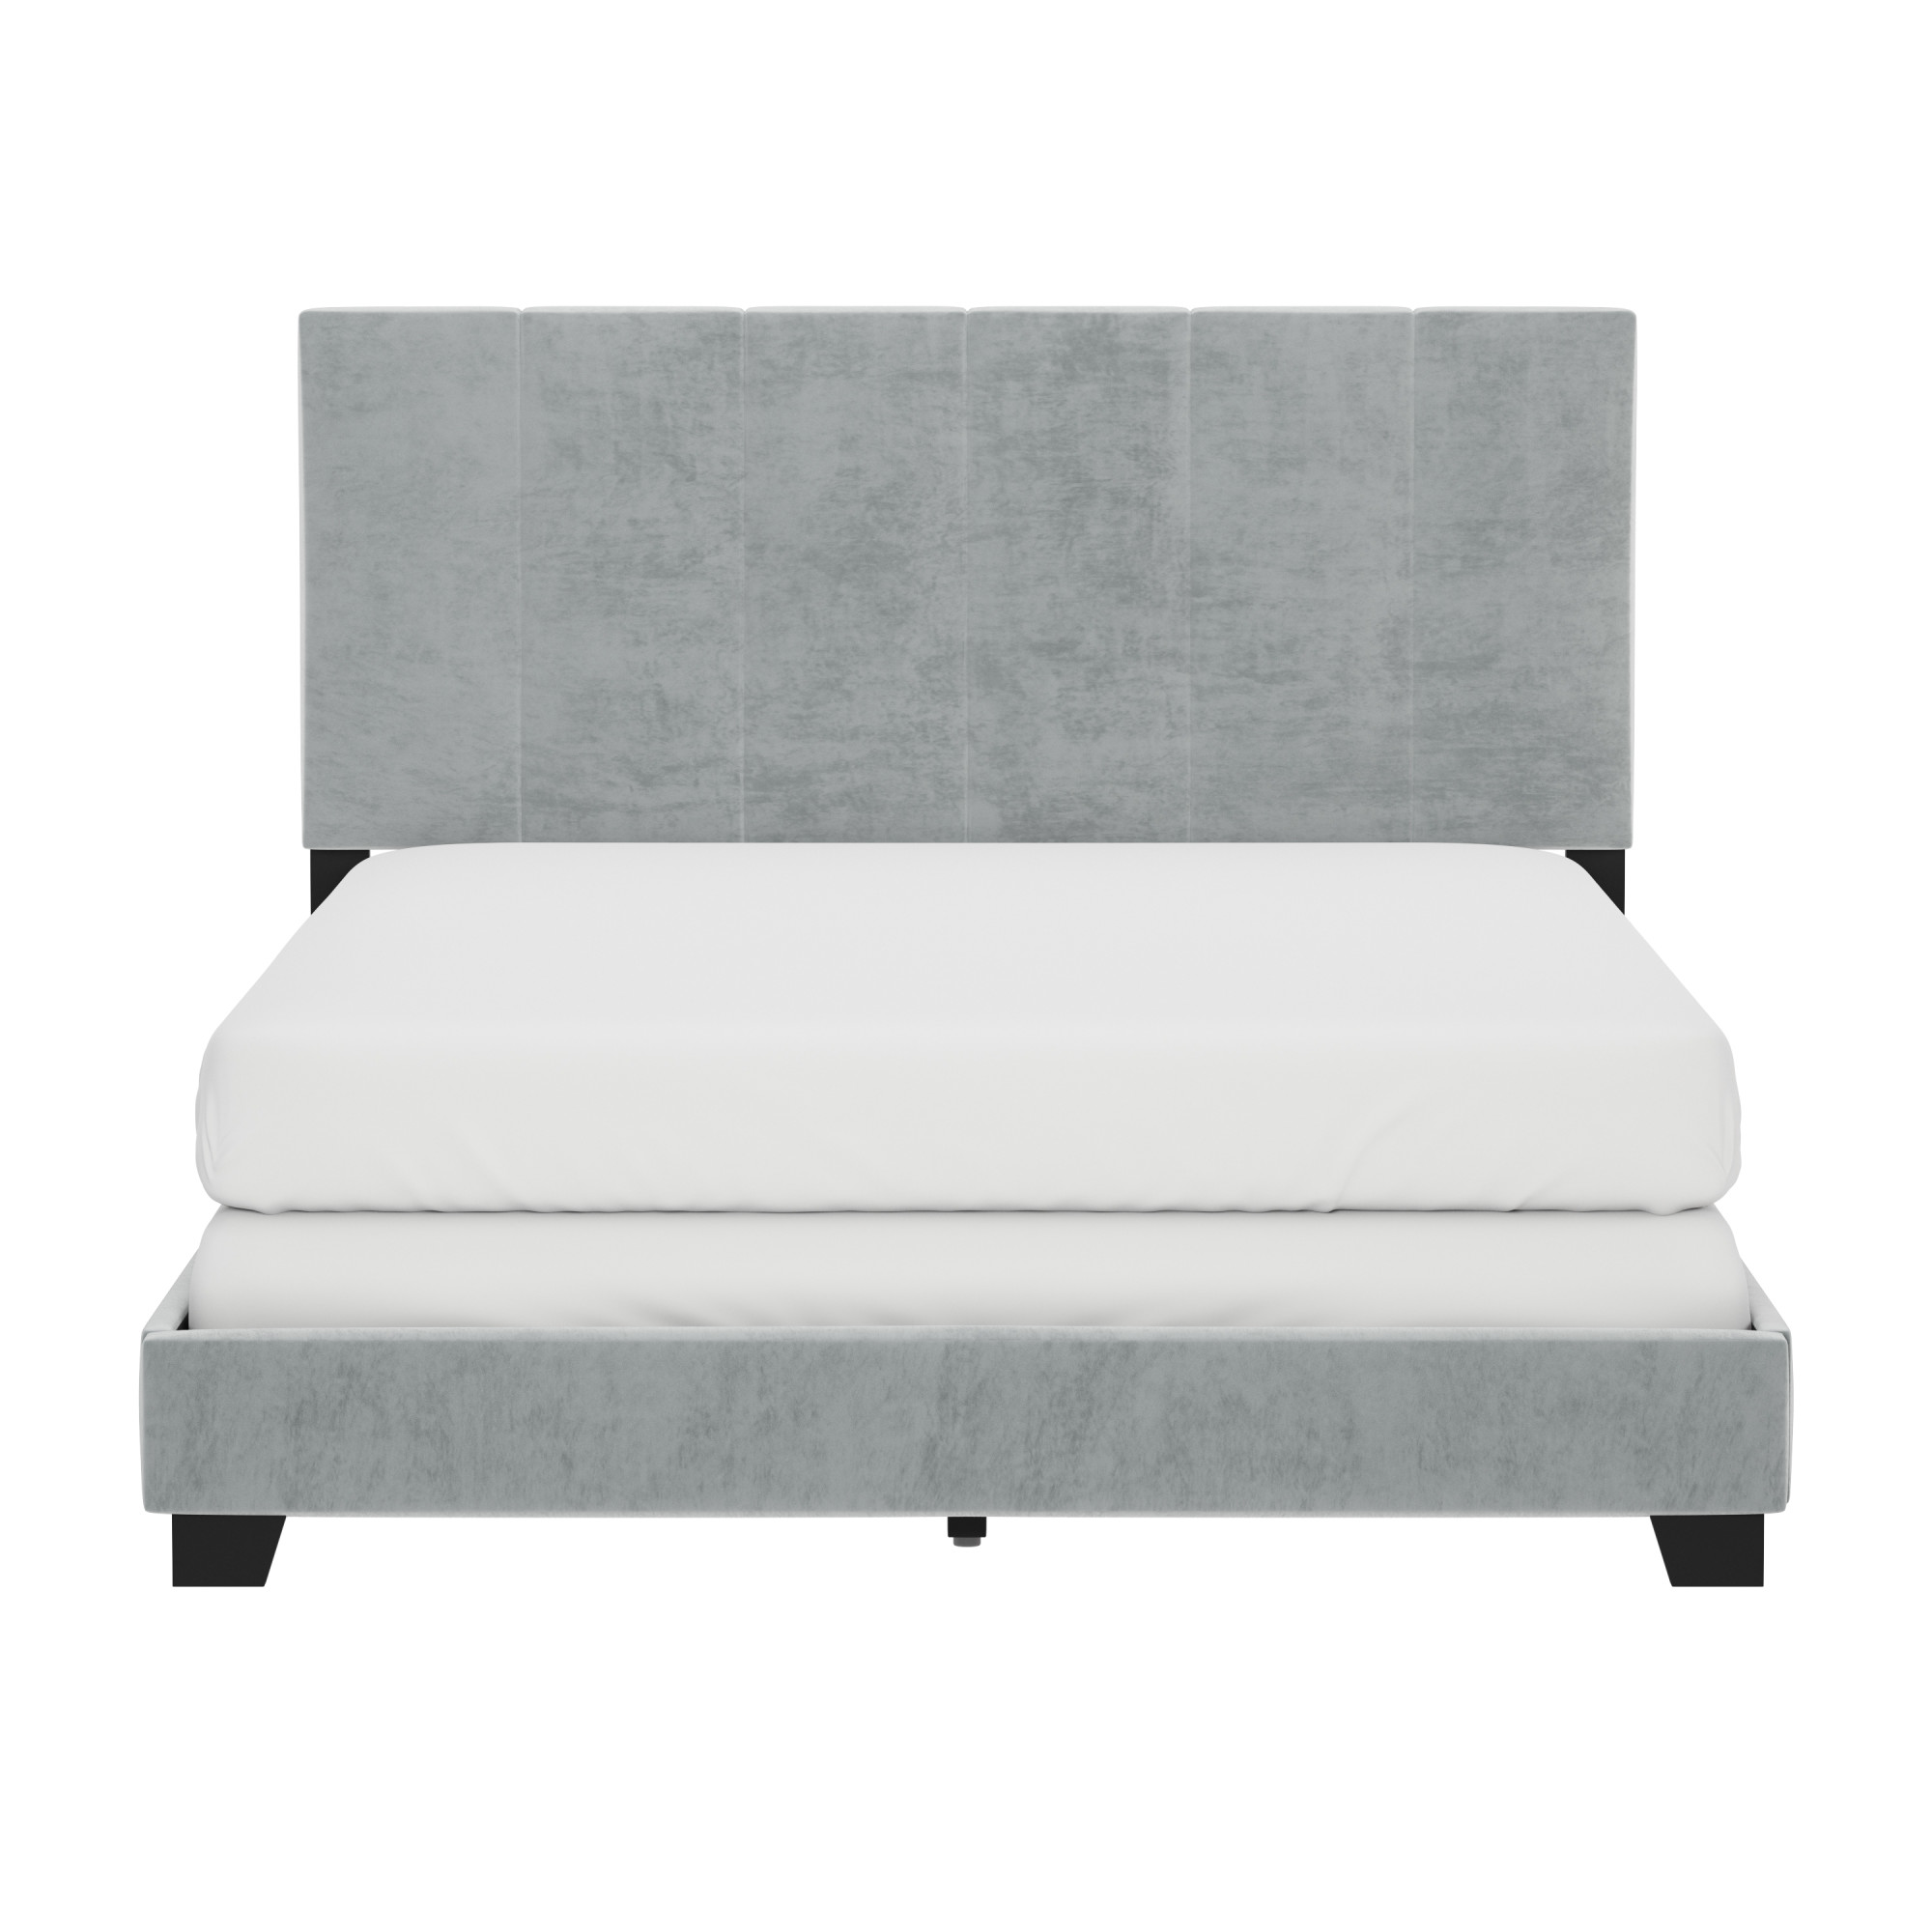 Reece Channel Stitched Upholstered Full Bed, Platinum Grey, by Hillsdale Living Essentials - image 3 of 17